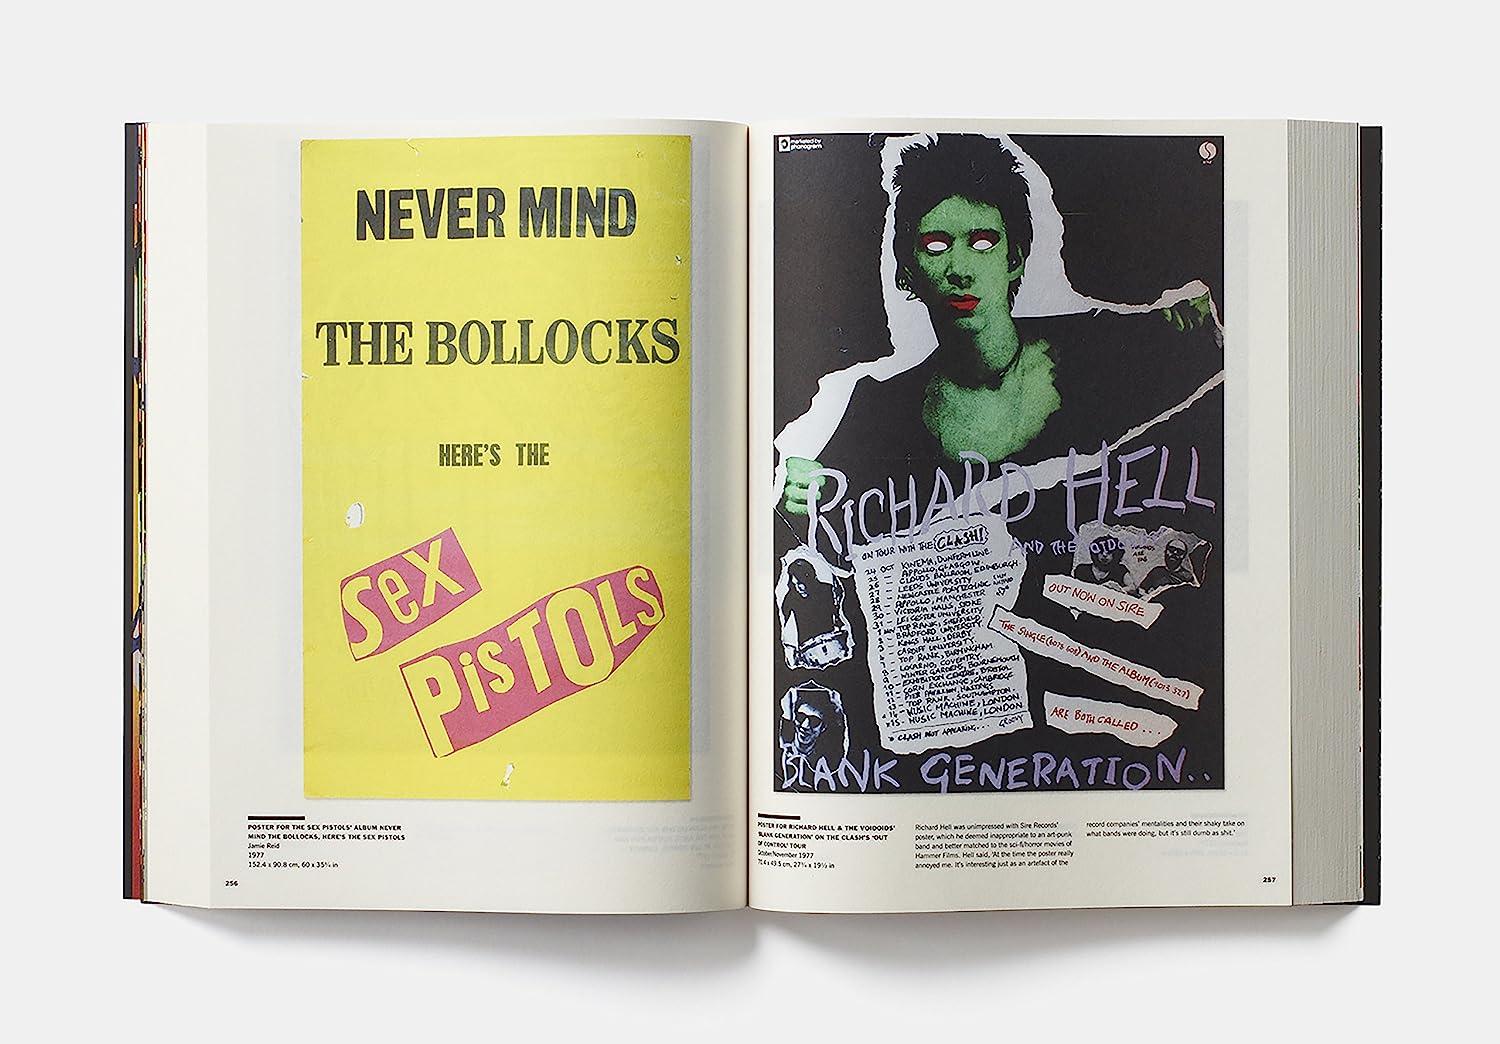 An unopened copy of this seminal tome on ephemera from the Punk era.

Oh So Pretty: Punk in Print 1976-80 is an unrivaled collection of visually striking ephemera from Britain’s punk subculture. It presents 500 artifacts - 'zines,' gig posters,